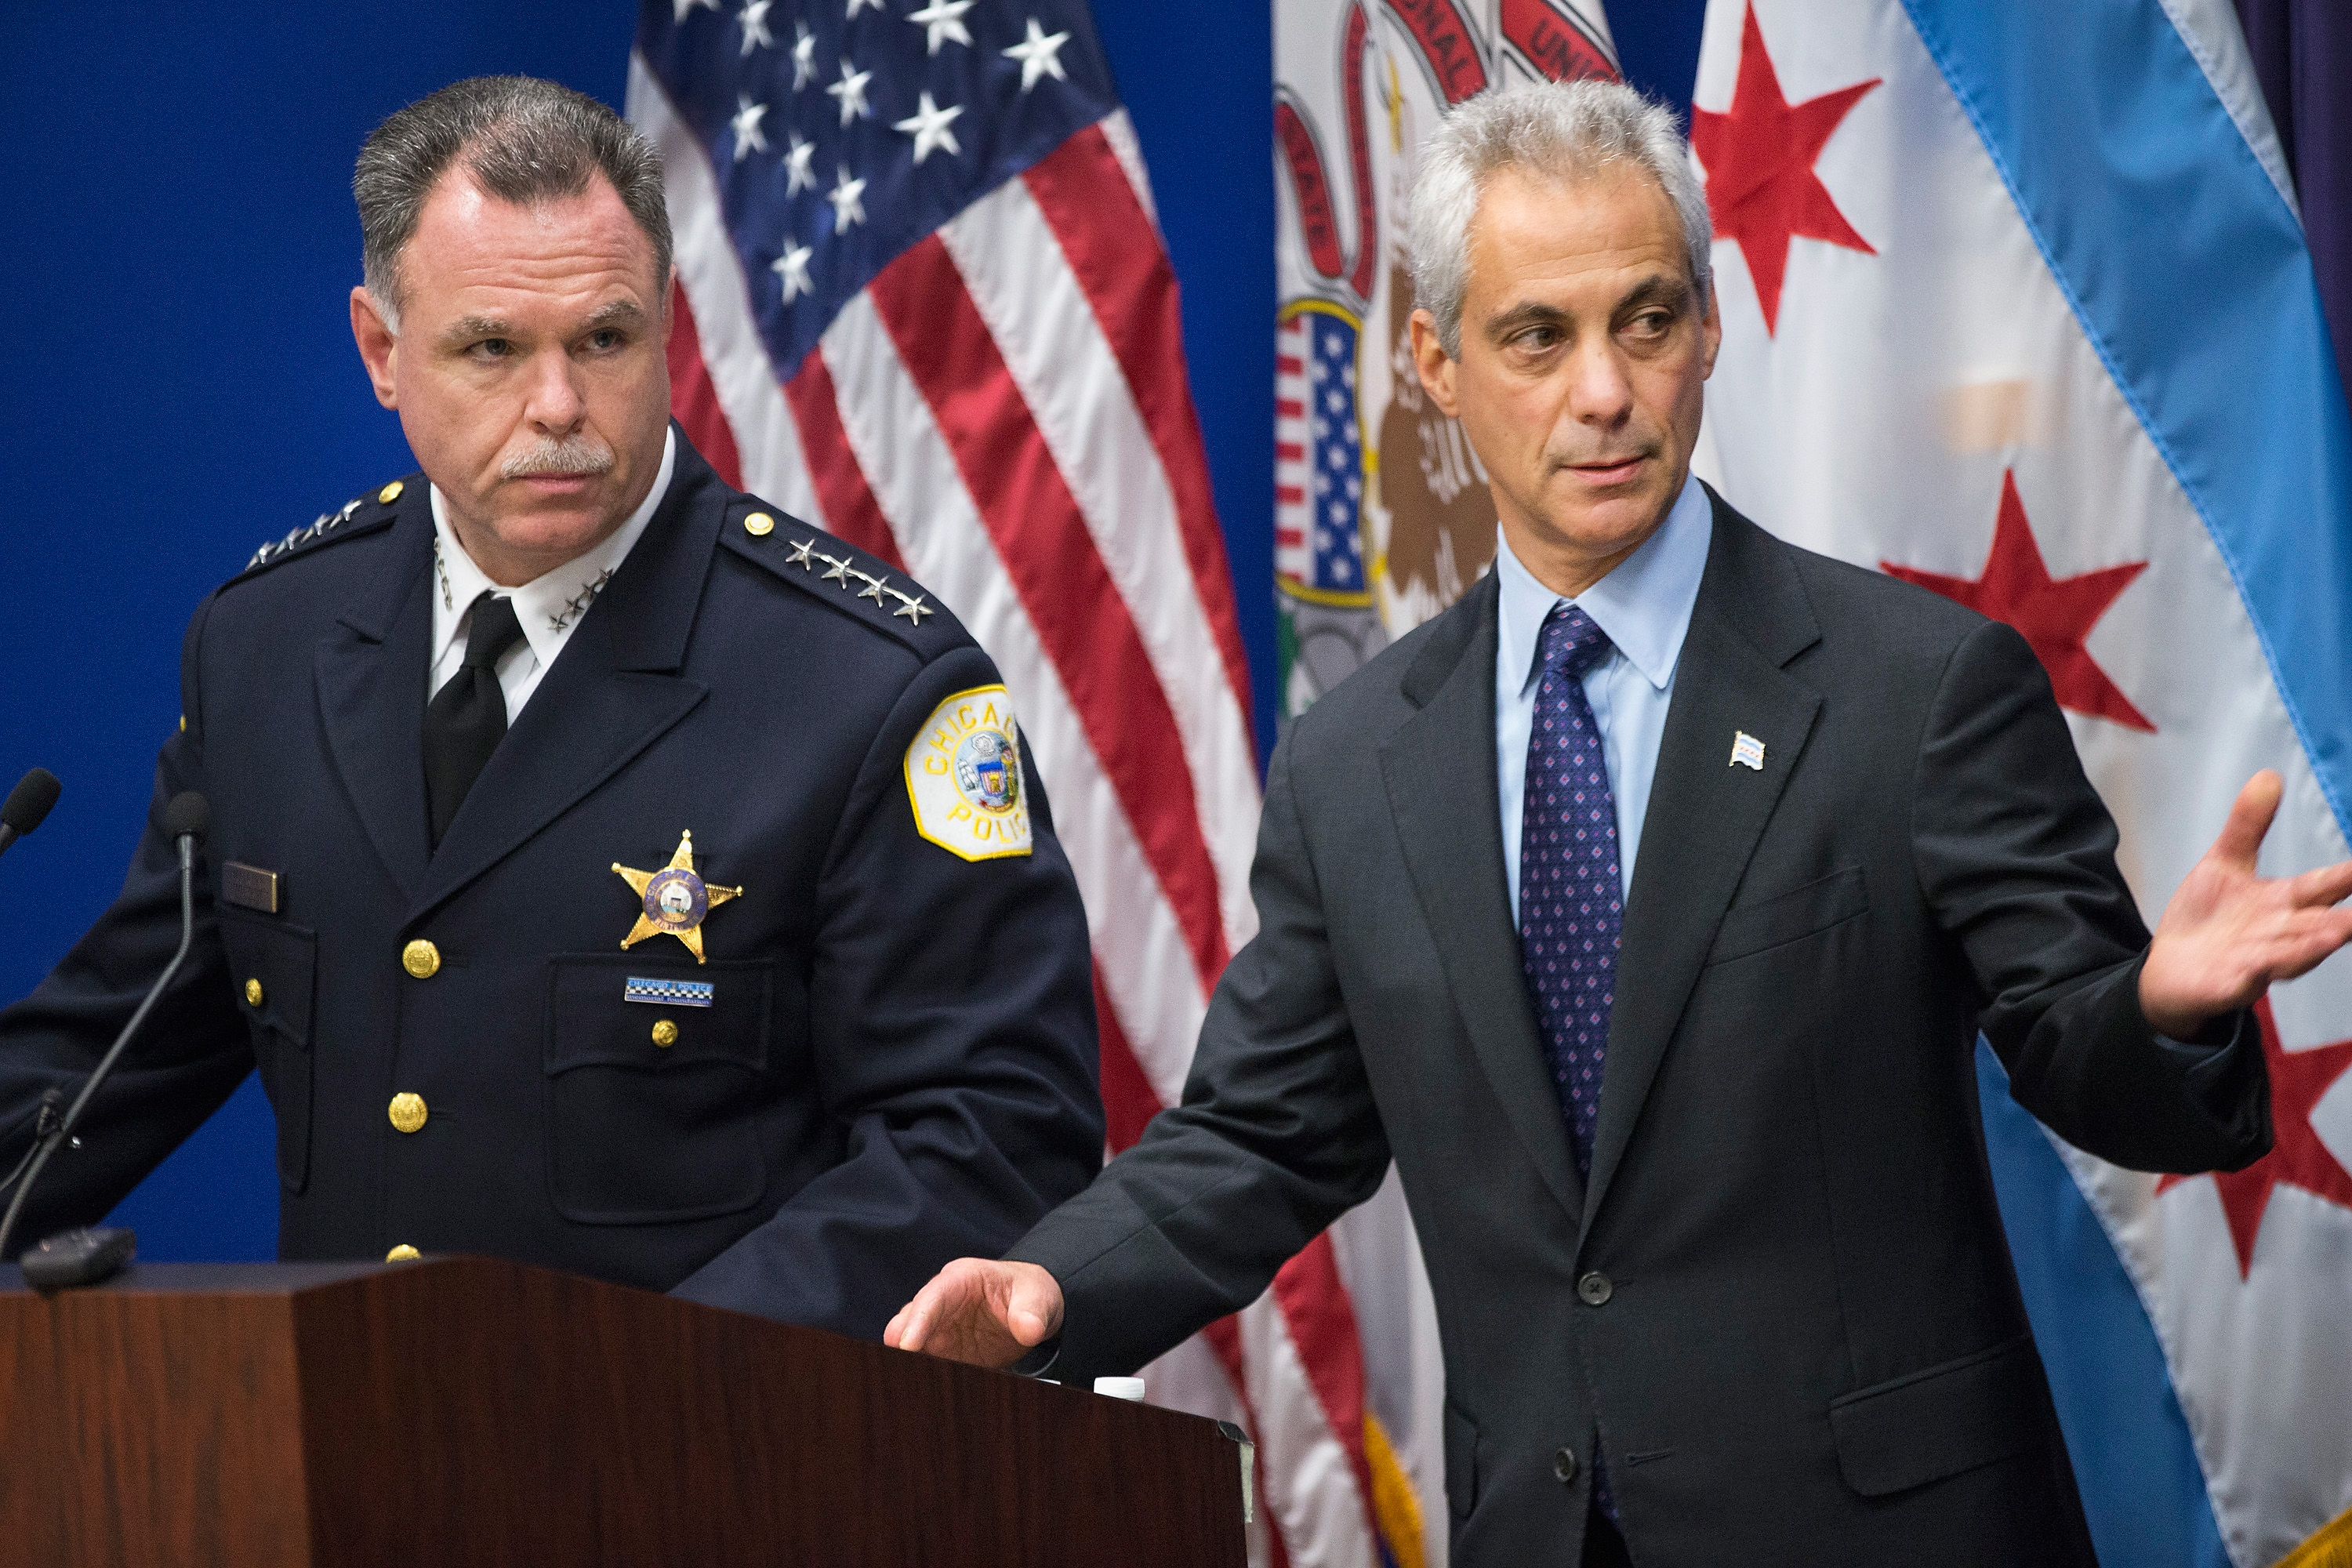 Chicago Police Superintendent Garry McCarthy (L) and Mayor Rahm Emanuel arrive for a  press conference to address the arrest of Chicago Police officer Jason Van Dyke in Chicago on Nov. 24, 2015. (Scott Olson&mdash;Getty Images)